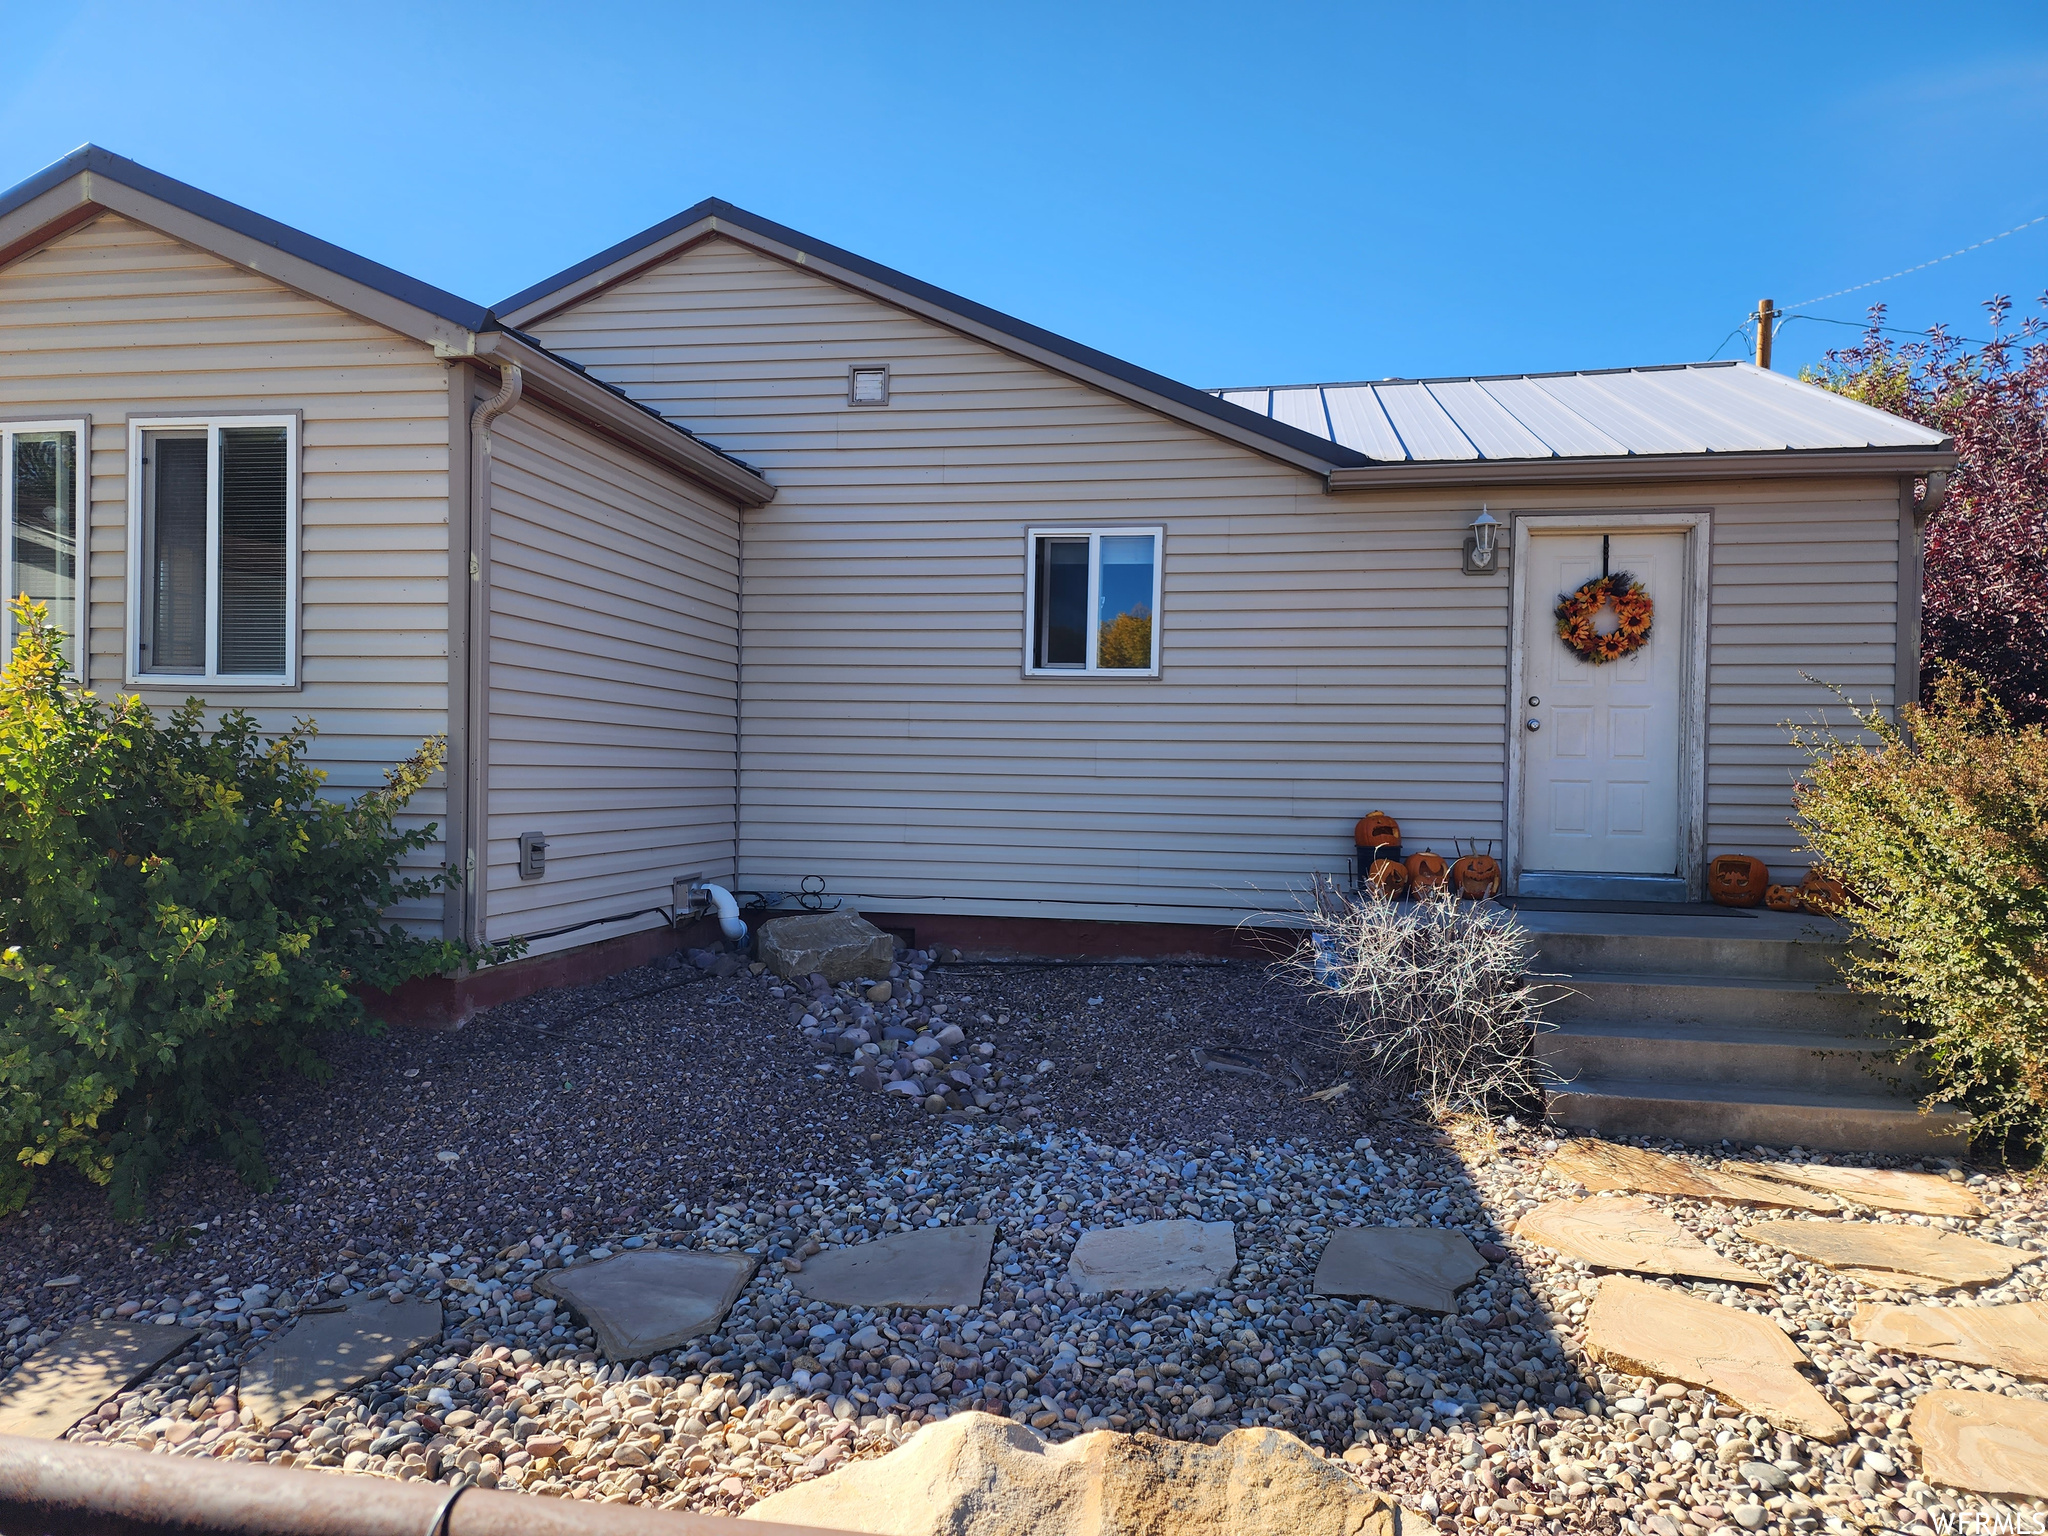 7960 E HWY 40, Fort Duchesne, Utah 84026, 4 Bedrooms Bedrooms, 6 Rooms Rooms,1 BathroomBathrooms,Residential,For sale,E HWY 40,1963080